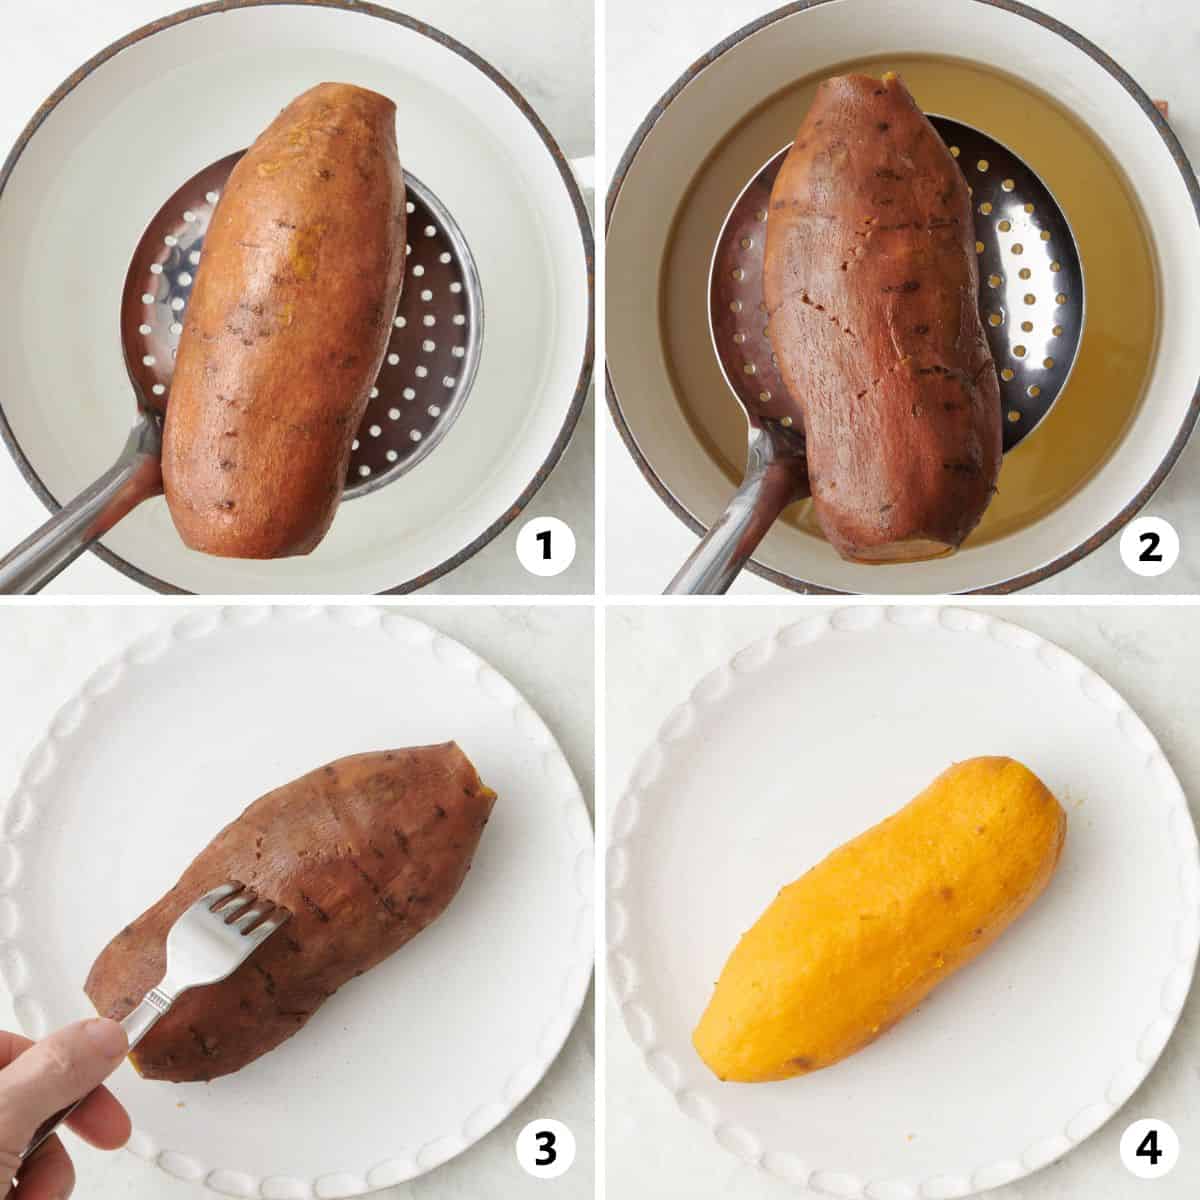 4 image collaging on how to making recipe: 1: adding a sweet potato to a pot of water, 2- after boiling and removing from water, 3- piercing with a fork to show doneness, 4- with skin removed.